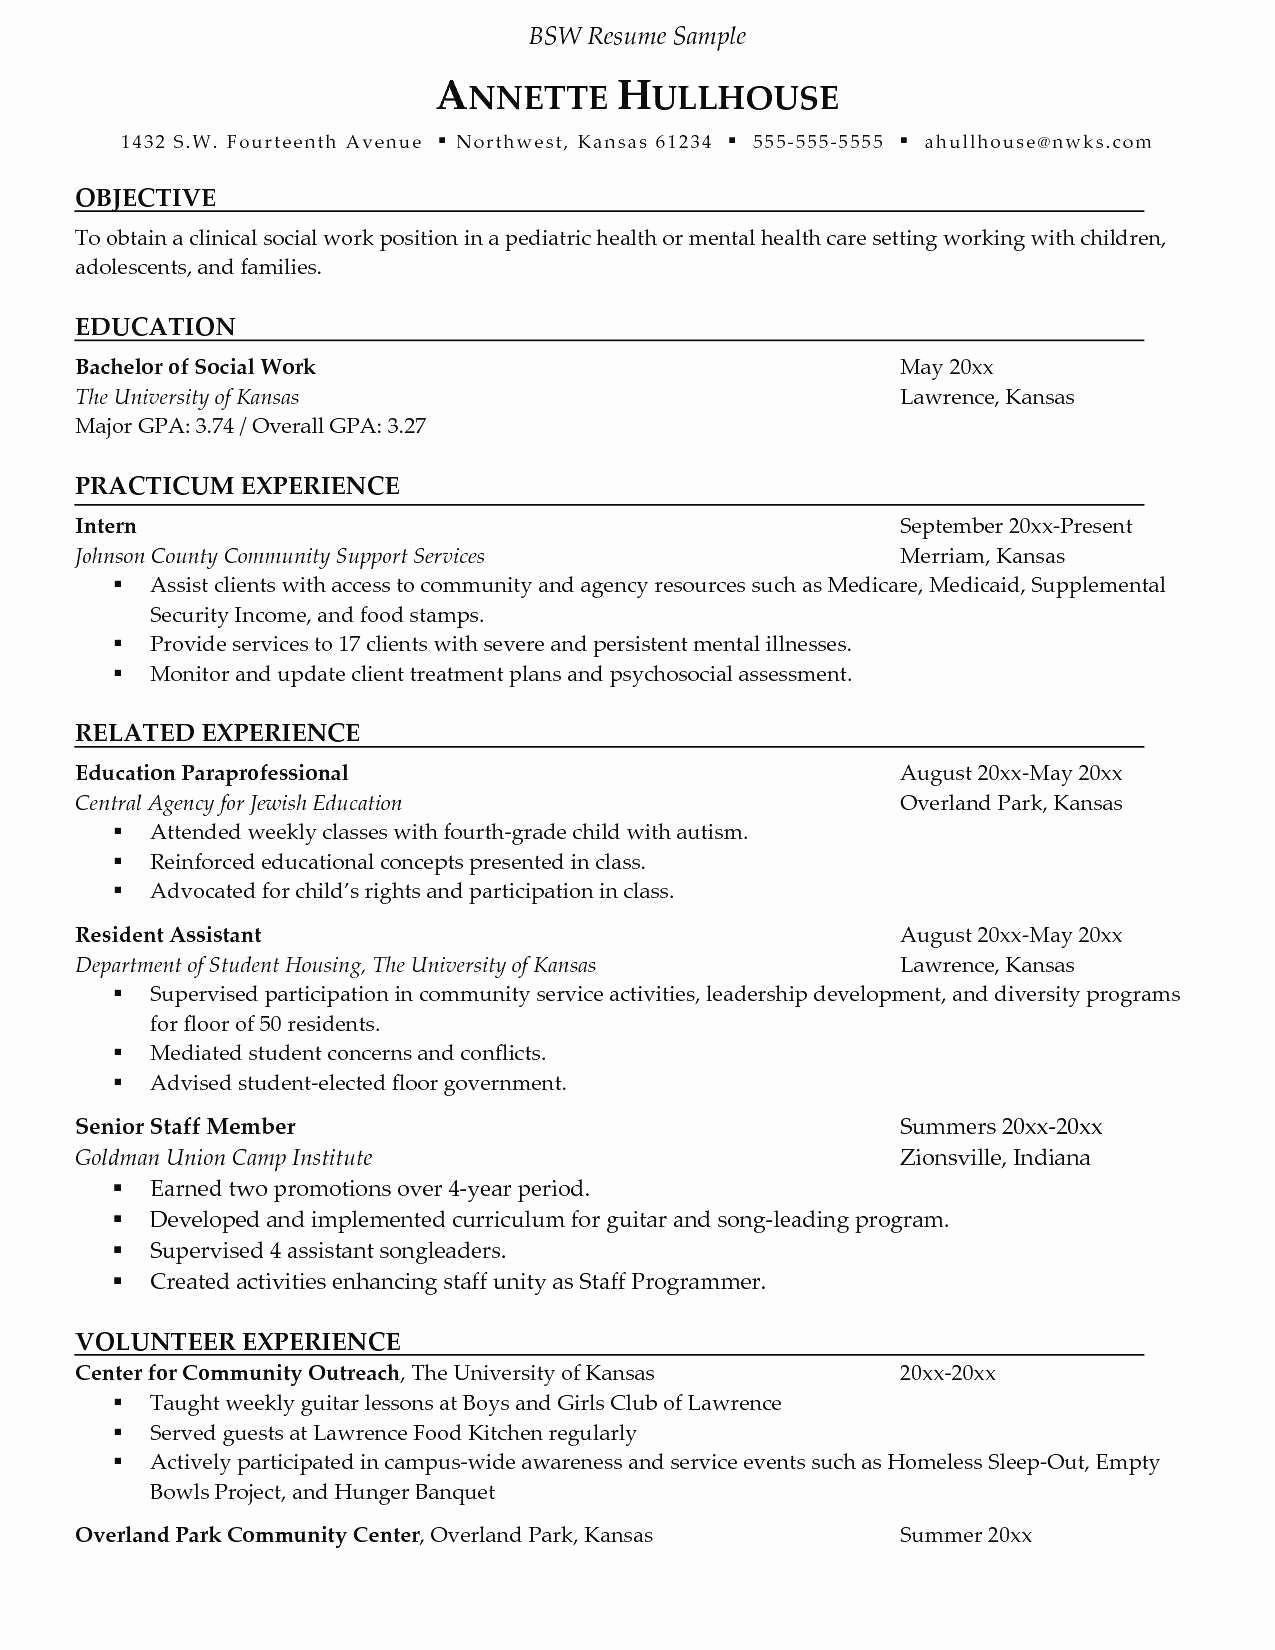 Social Work Treatment Plan Template Awesome Elegant Counseling Treatment Plan Template